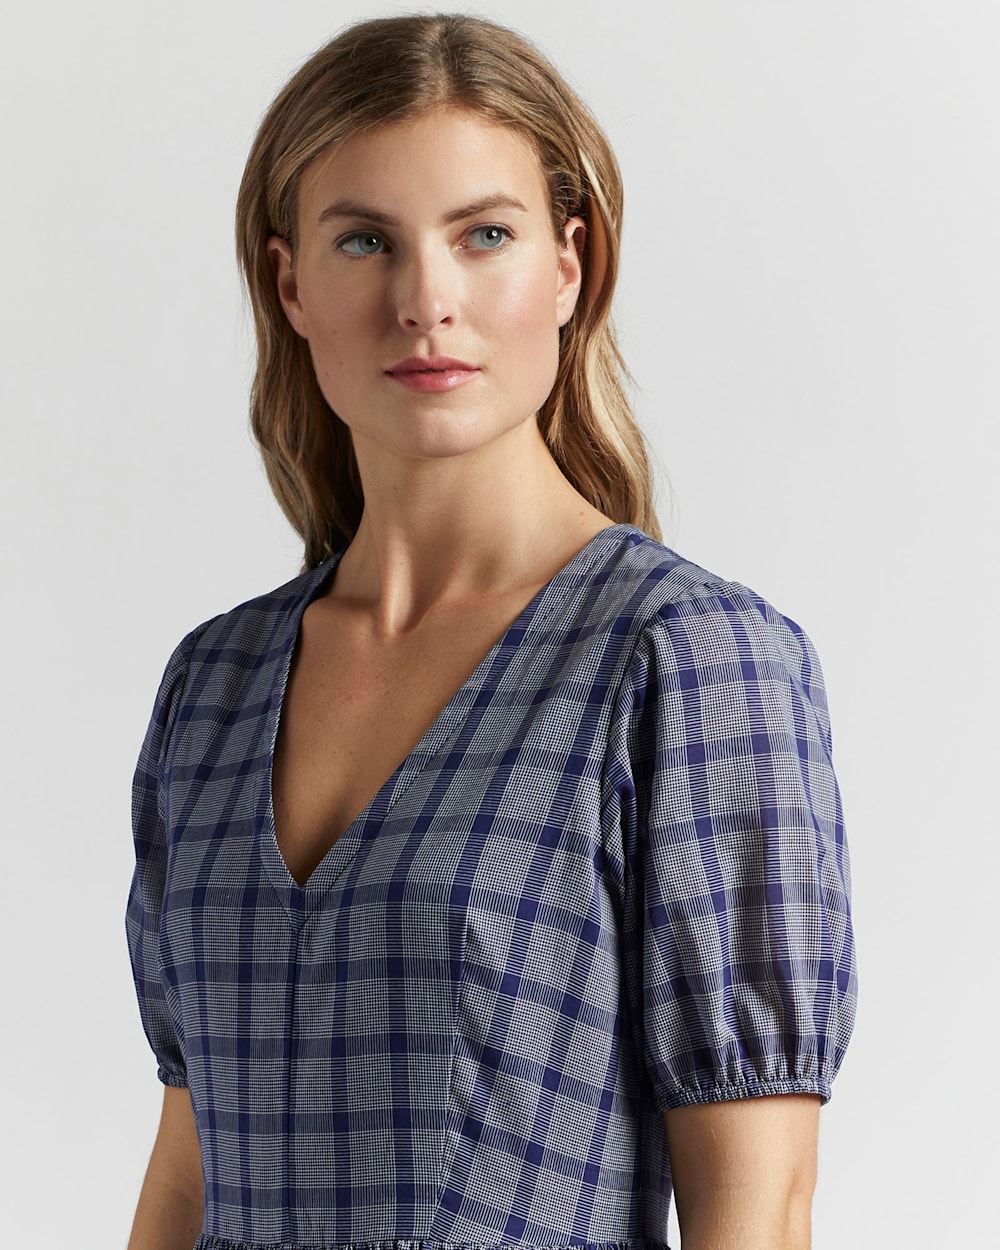 ALTERNATE VIEW OF AIRY TIERED MIDI DRESS IN NAVY/WHITE PLAID image number 5